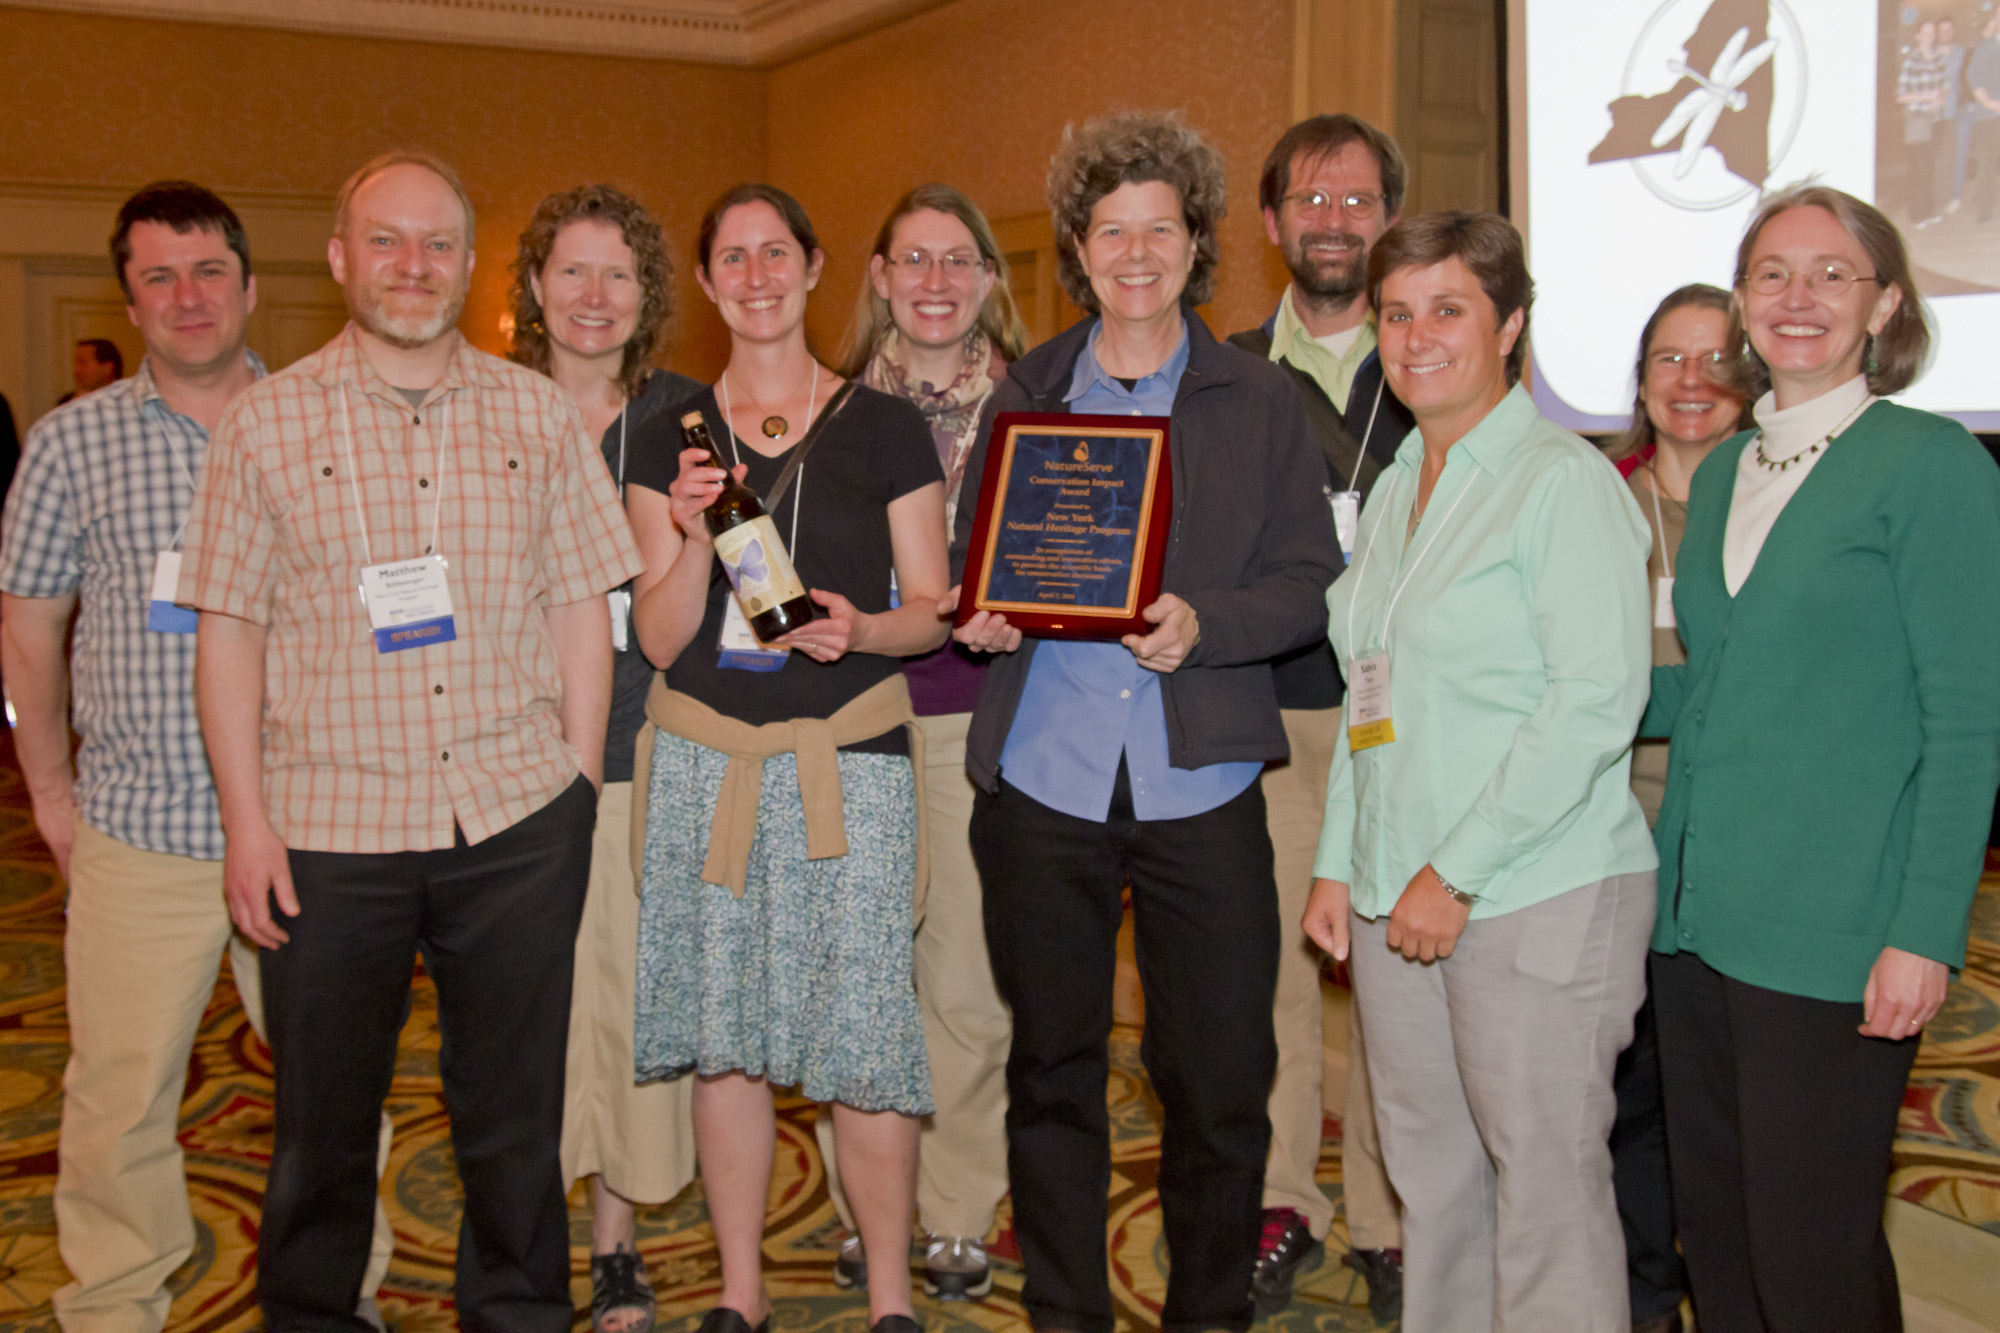 Scientists from the New York Natural Heritage Program receive NatureServe's 2014 Conservation Impact Award at a reception during the Biodiversity Without Boundaries annual conference, on April 7 in New Orleans.